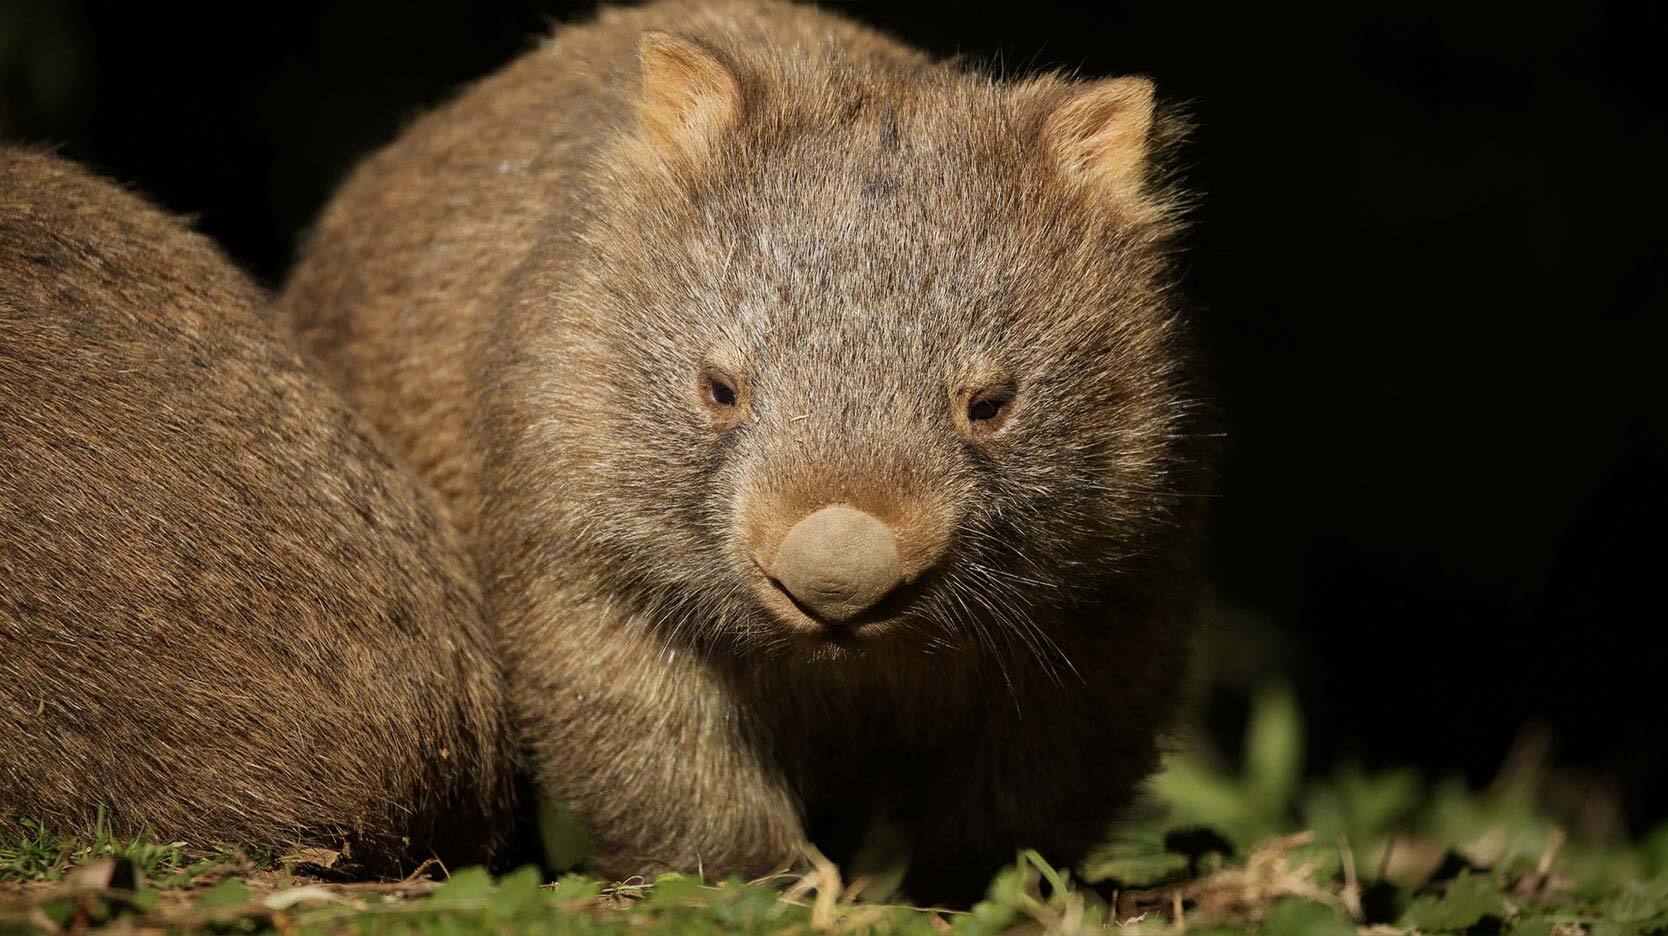 marsupial animal example of a wombat